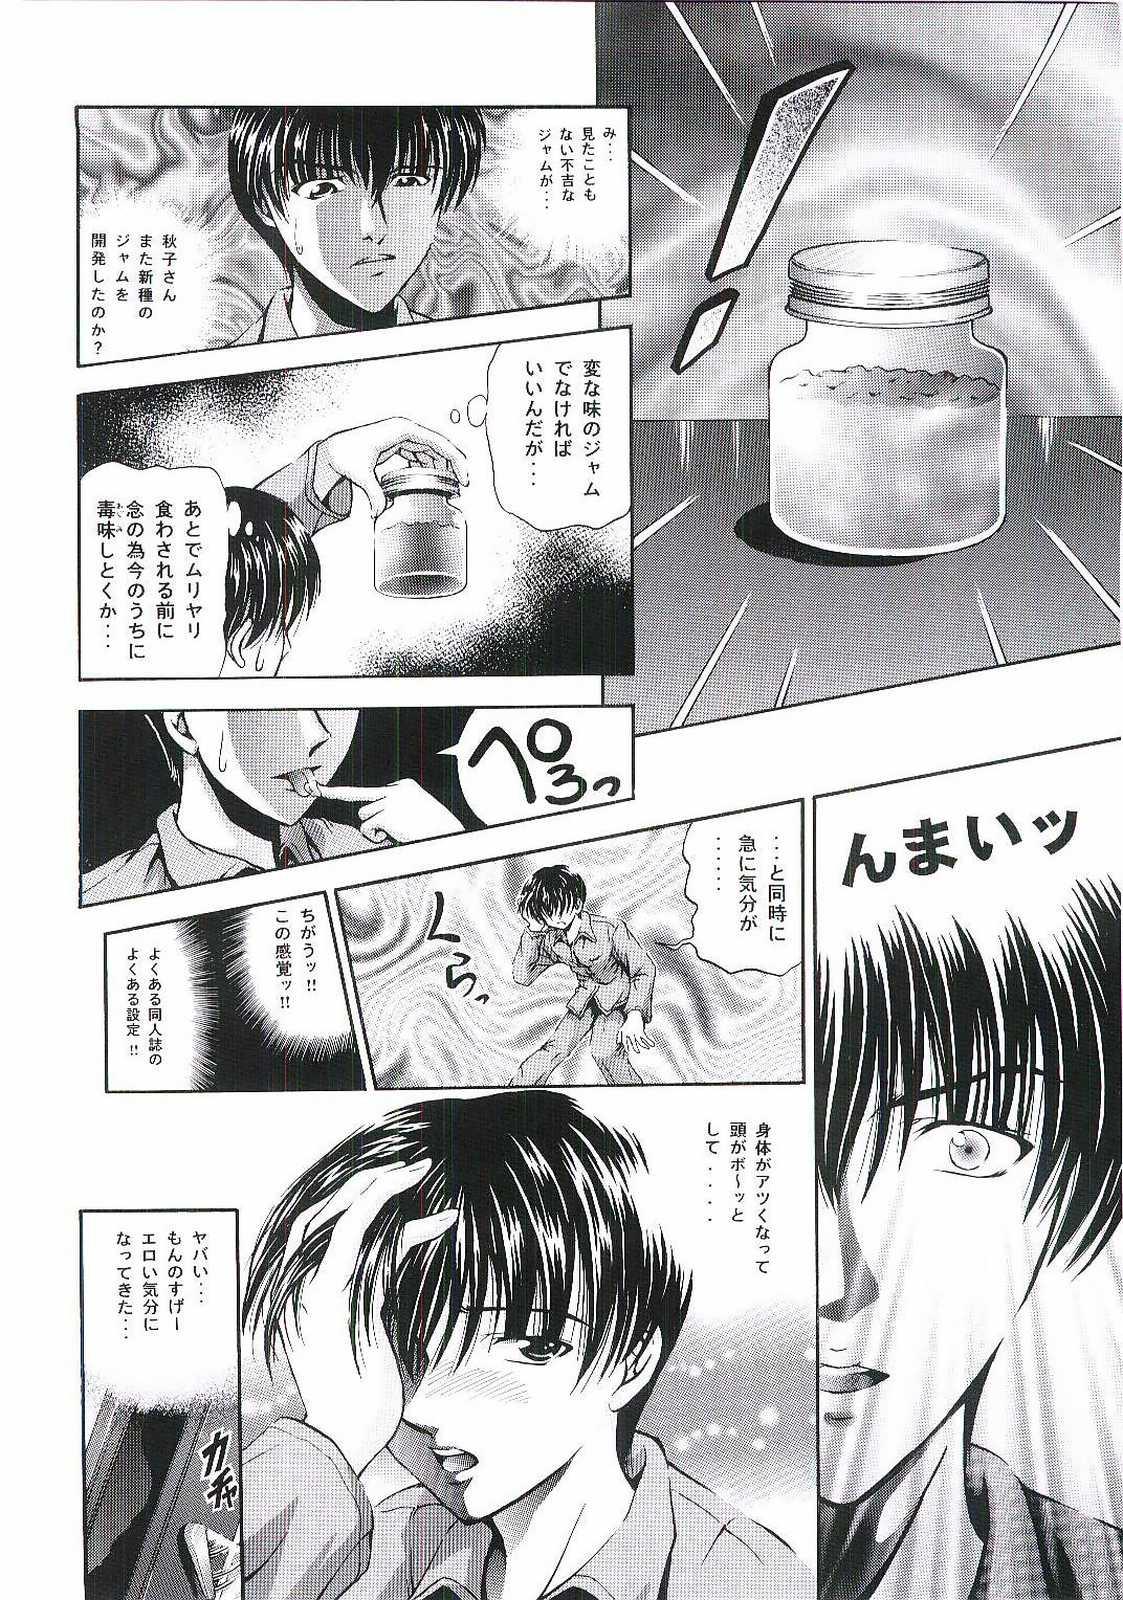 Blow Jobs Six Piece 1 - Kanon Gay Emo - Page 5